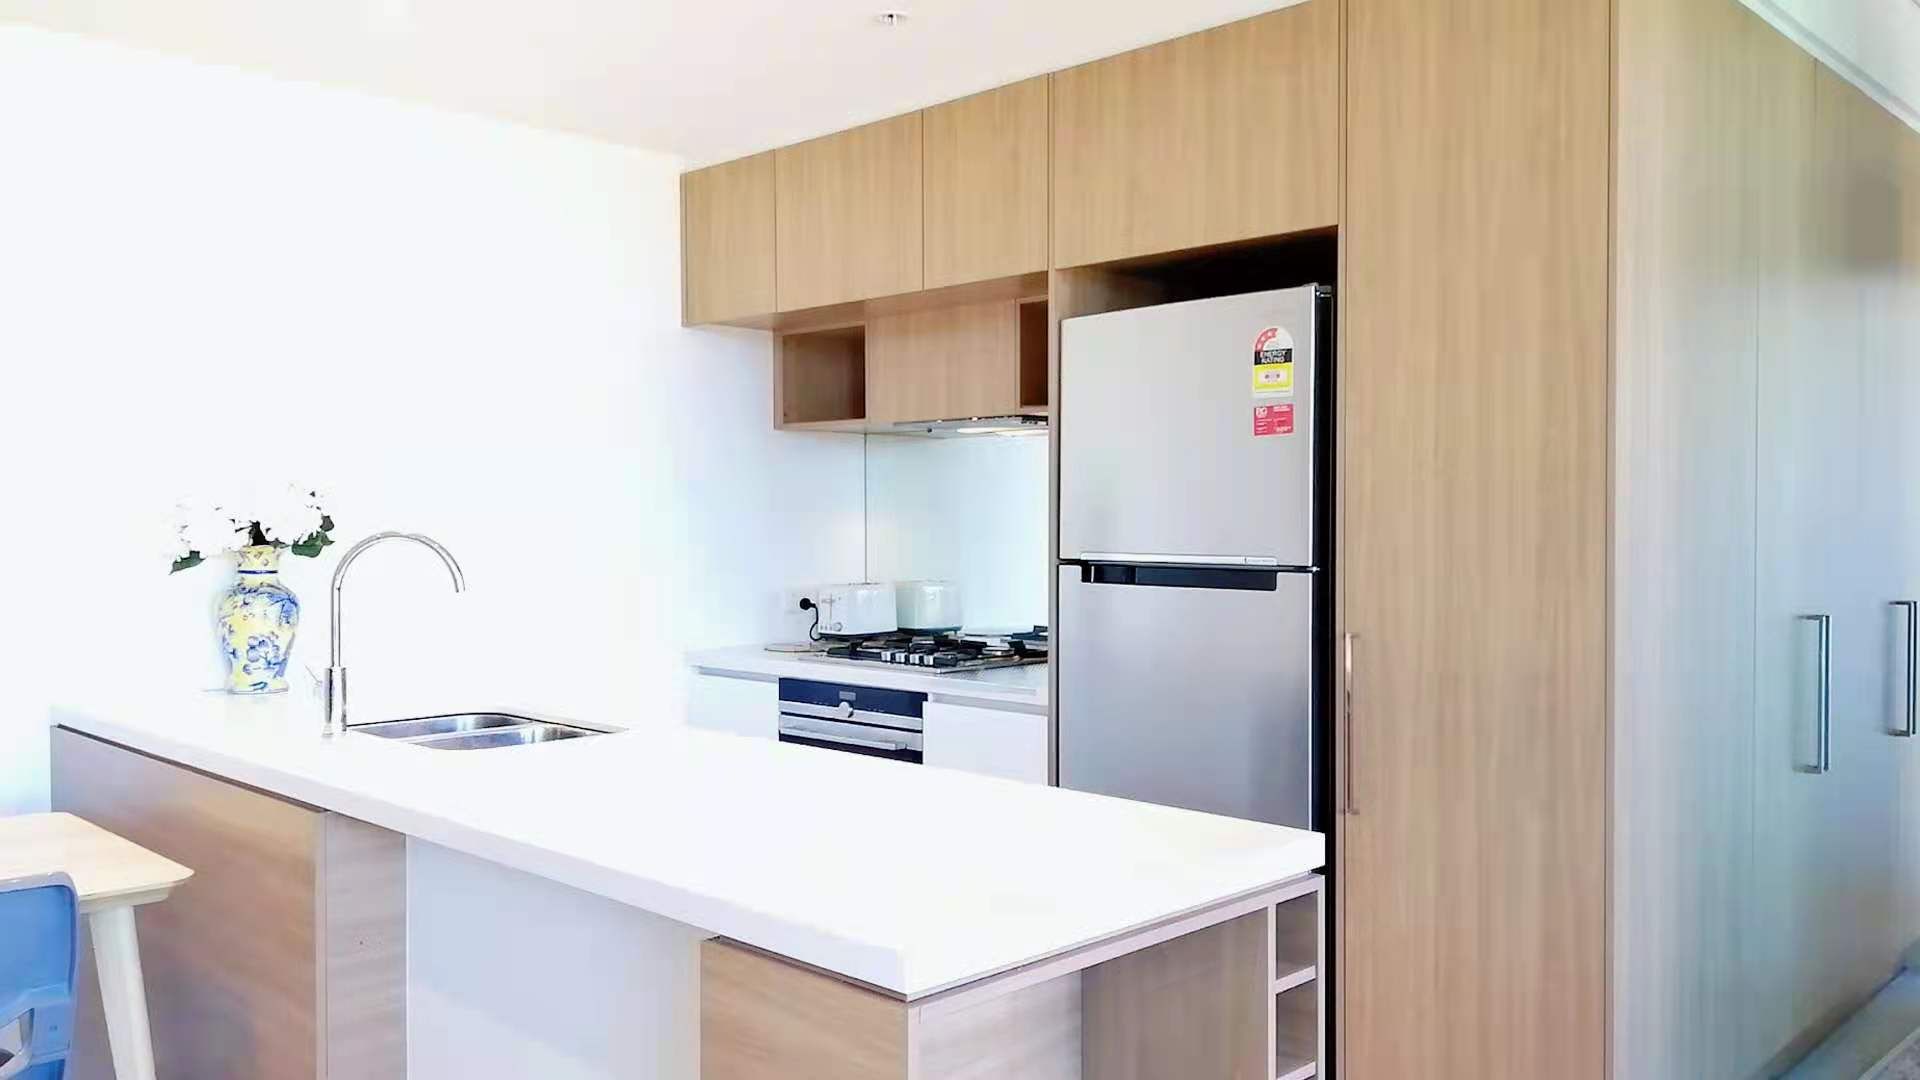 2 bedrooms Apartment / Unit / Flat in 514/1 Network Place NORTH RYDE NSW, 2113